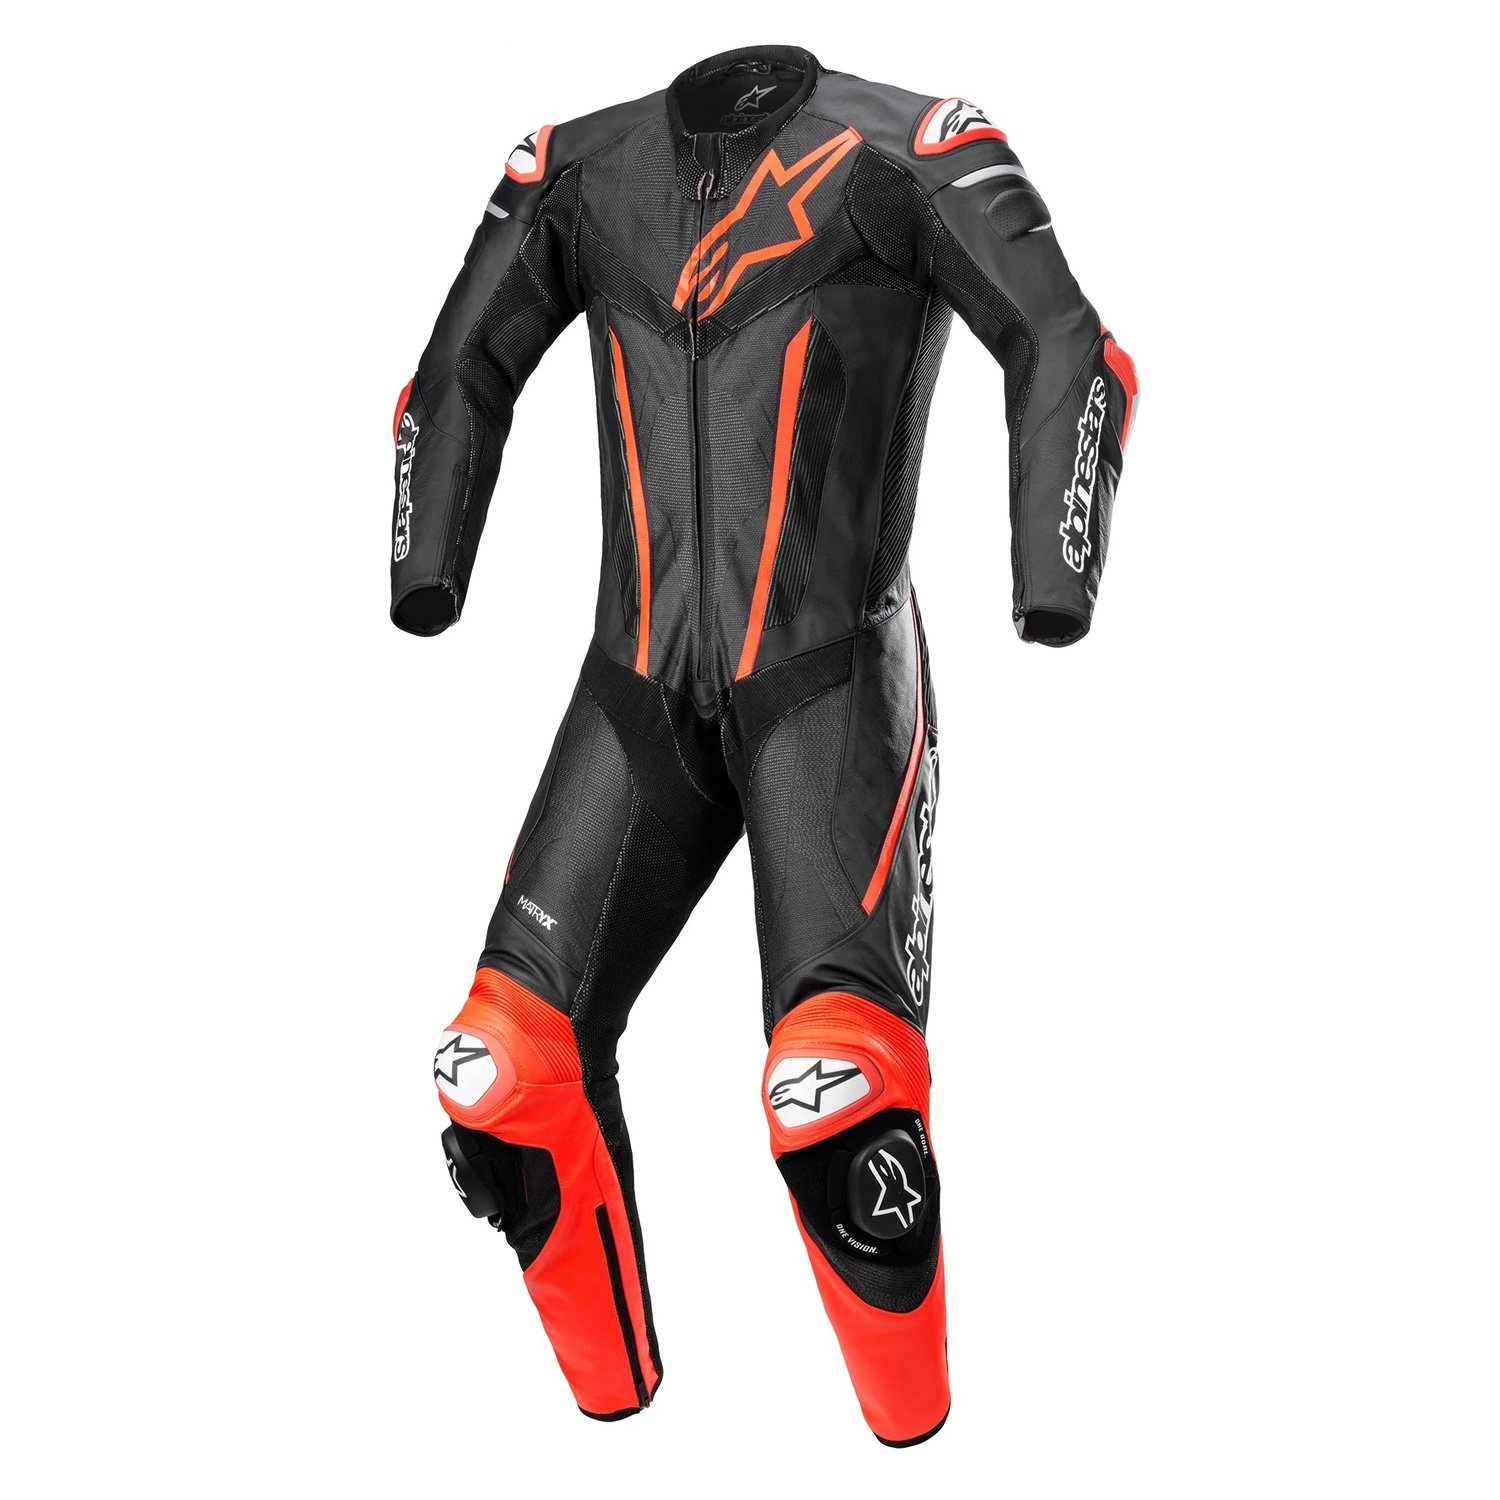 Image of Alpinestars Fusion Leather One Piece Suit Black Red Fluo Size 58 ID 8059175907371